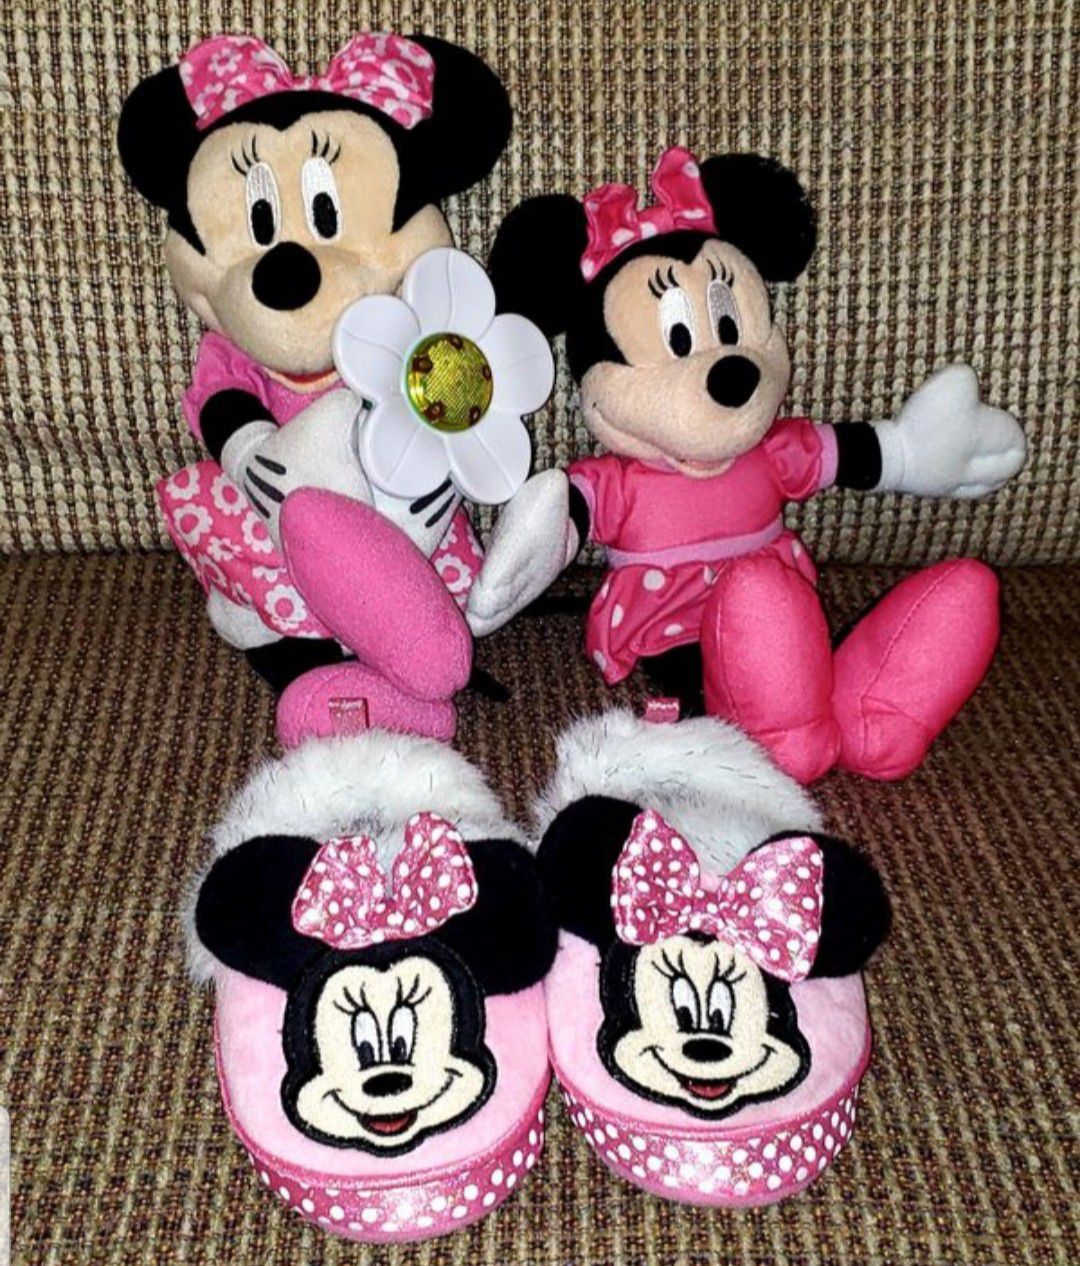 Minnie Mouse Lot of Plush Slippers Size 7/8 Kids & 2 Musical Toys